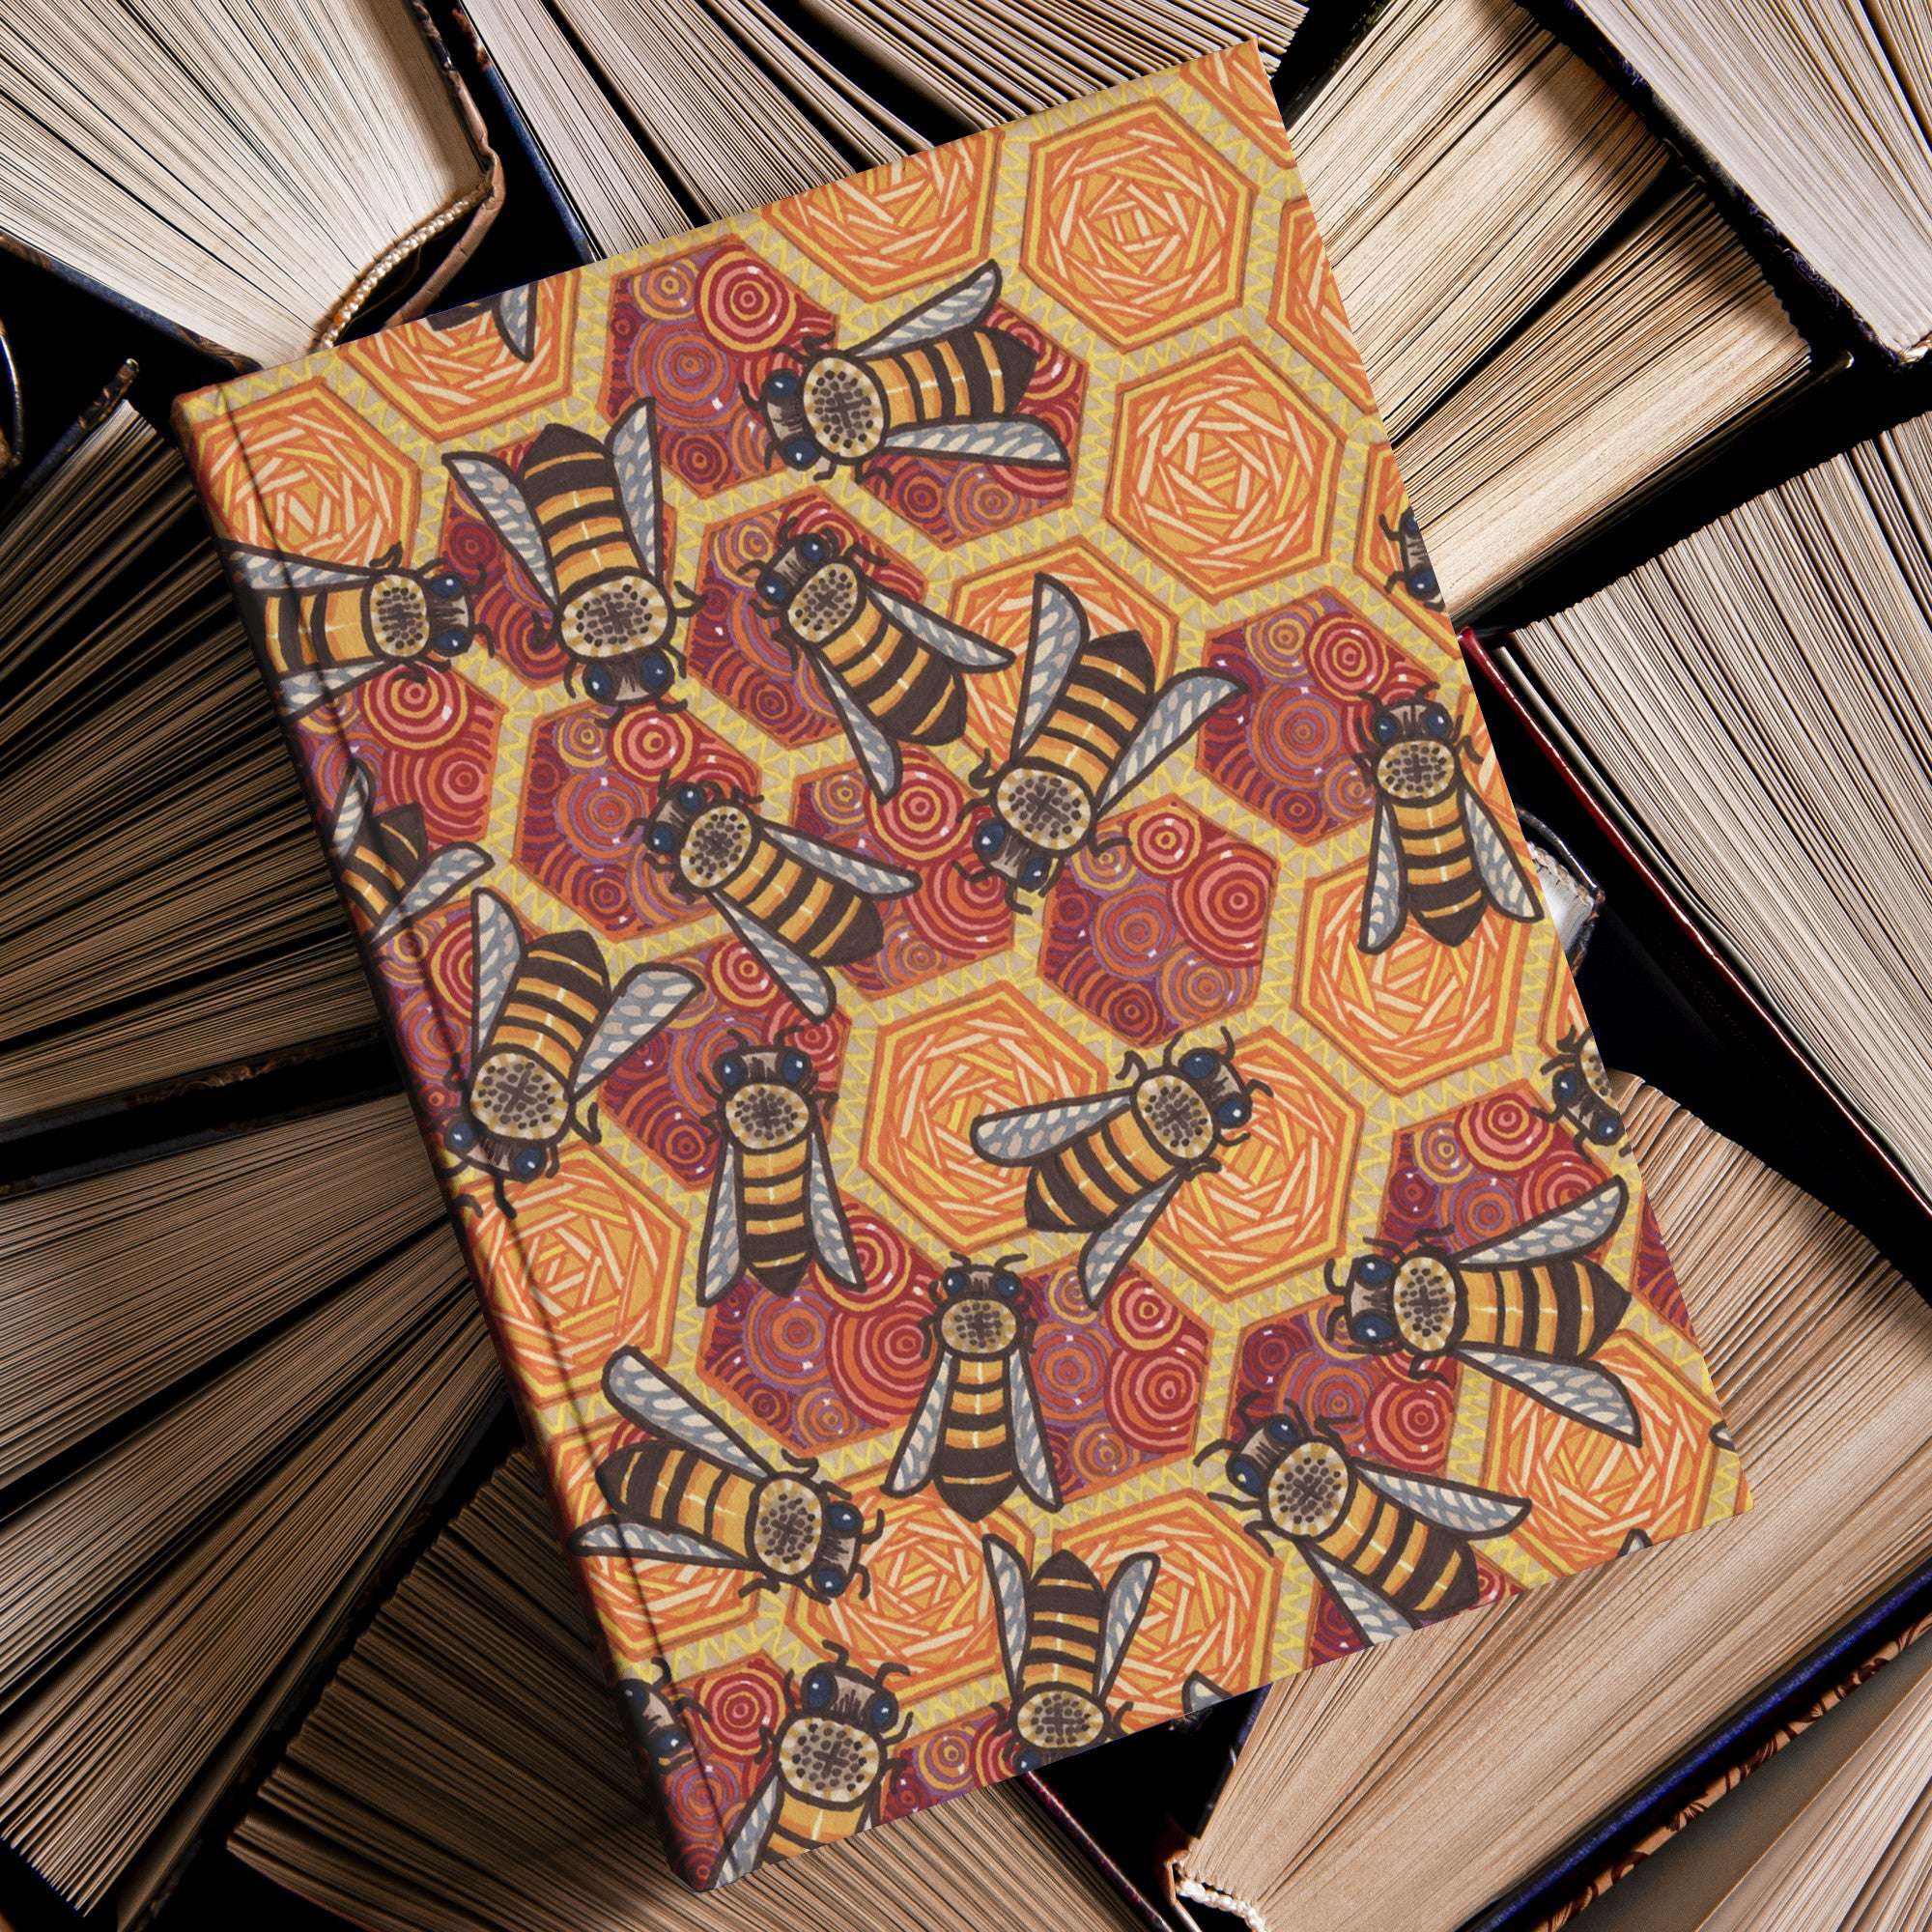 Journal with honeycomb and bee design on cover, resting on a pile of aged books.